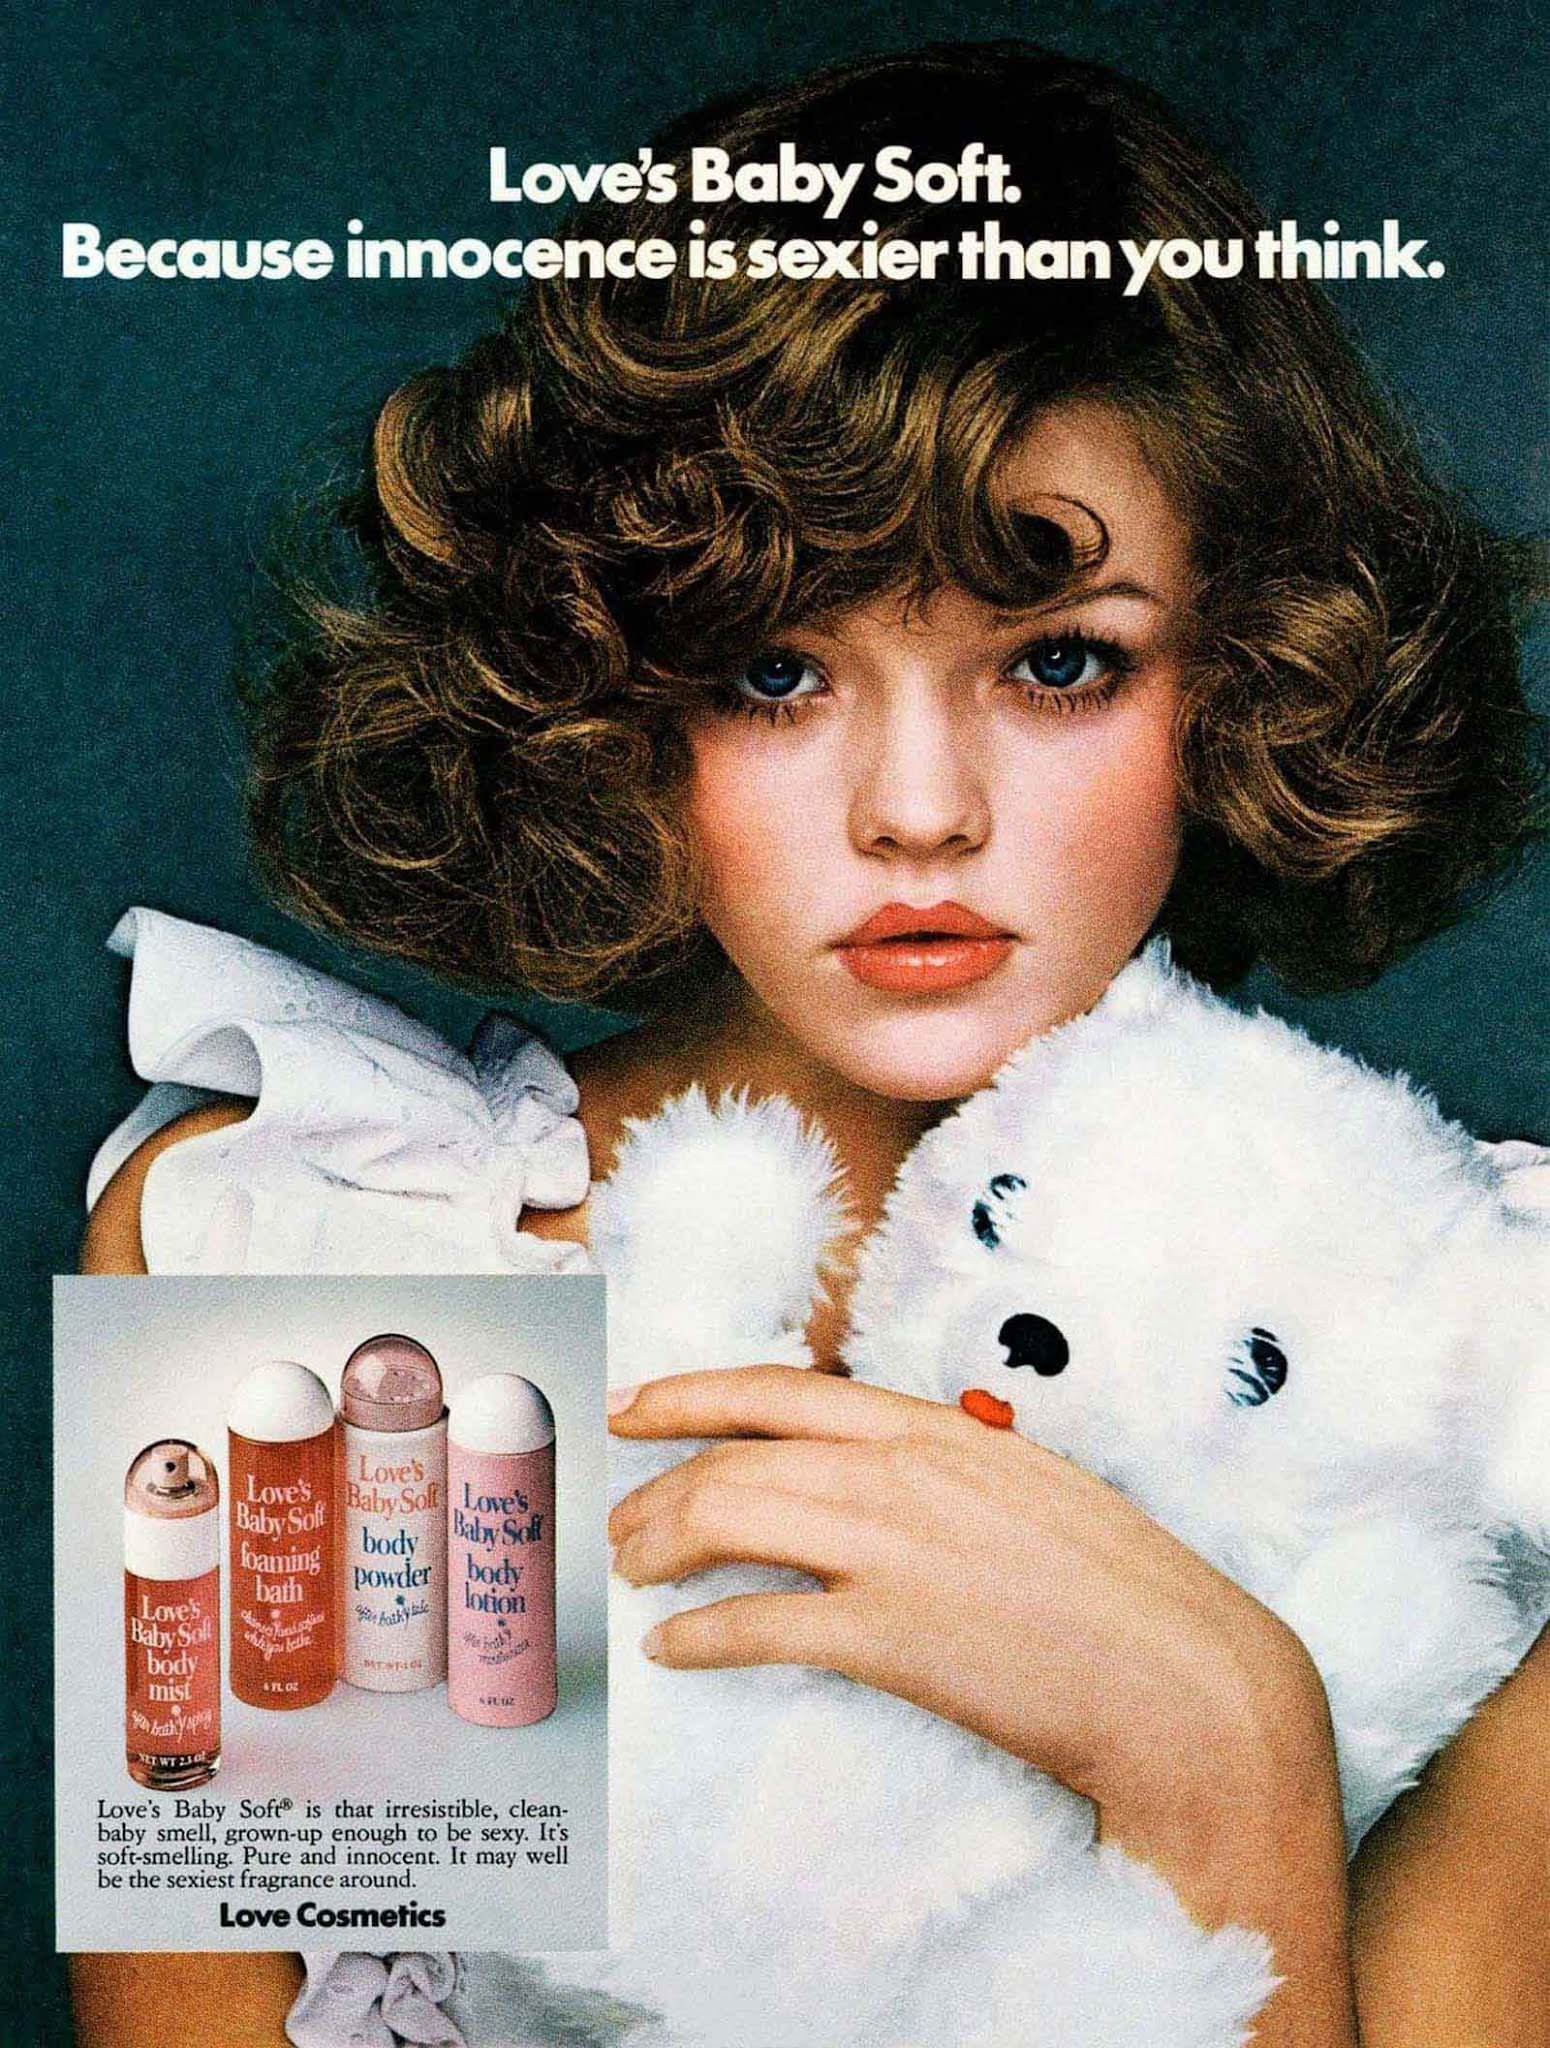 Because innocence is sexier than you think, 1975